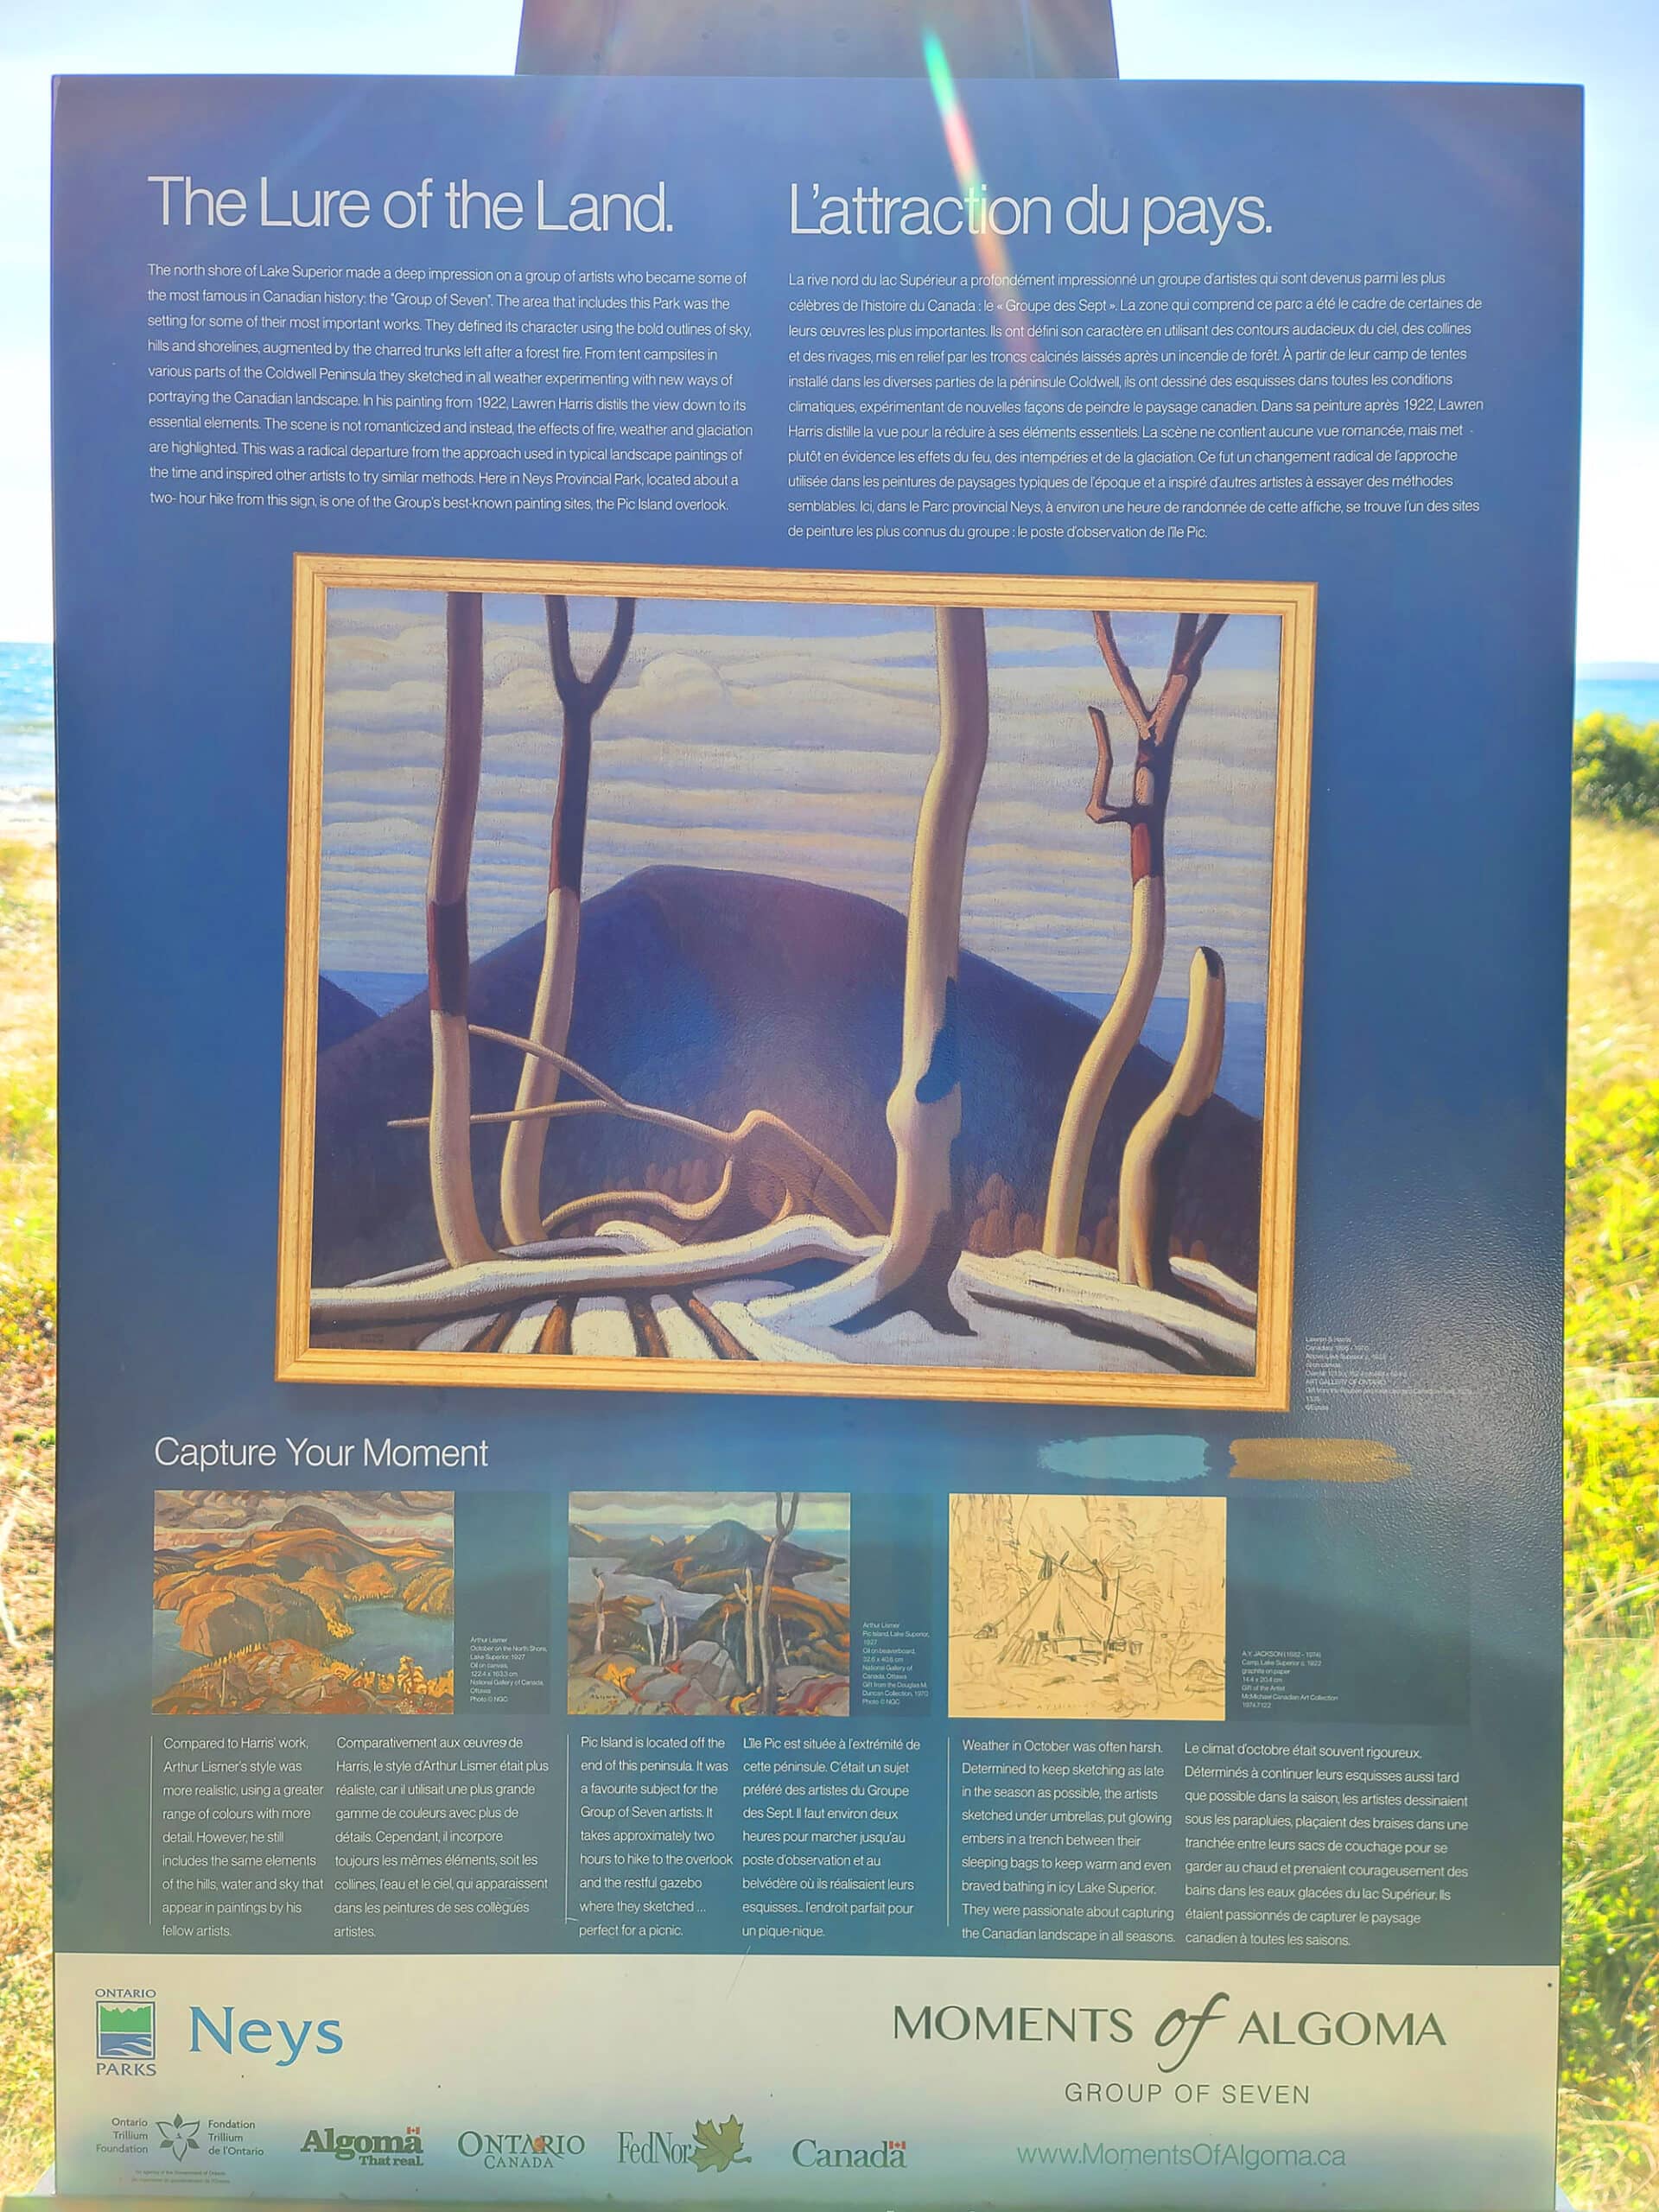 A photo of a Moments of Algoma billboard about the Group of 7's paintings of the area.